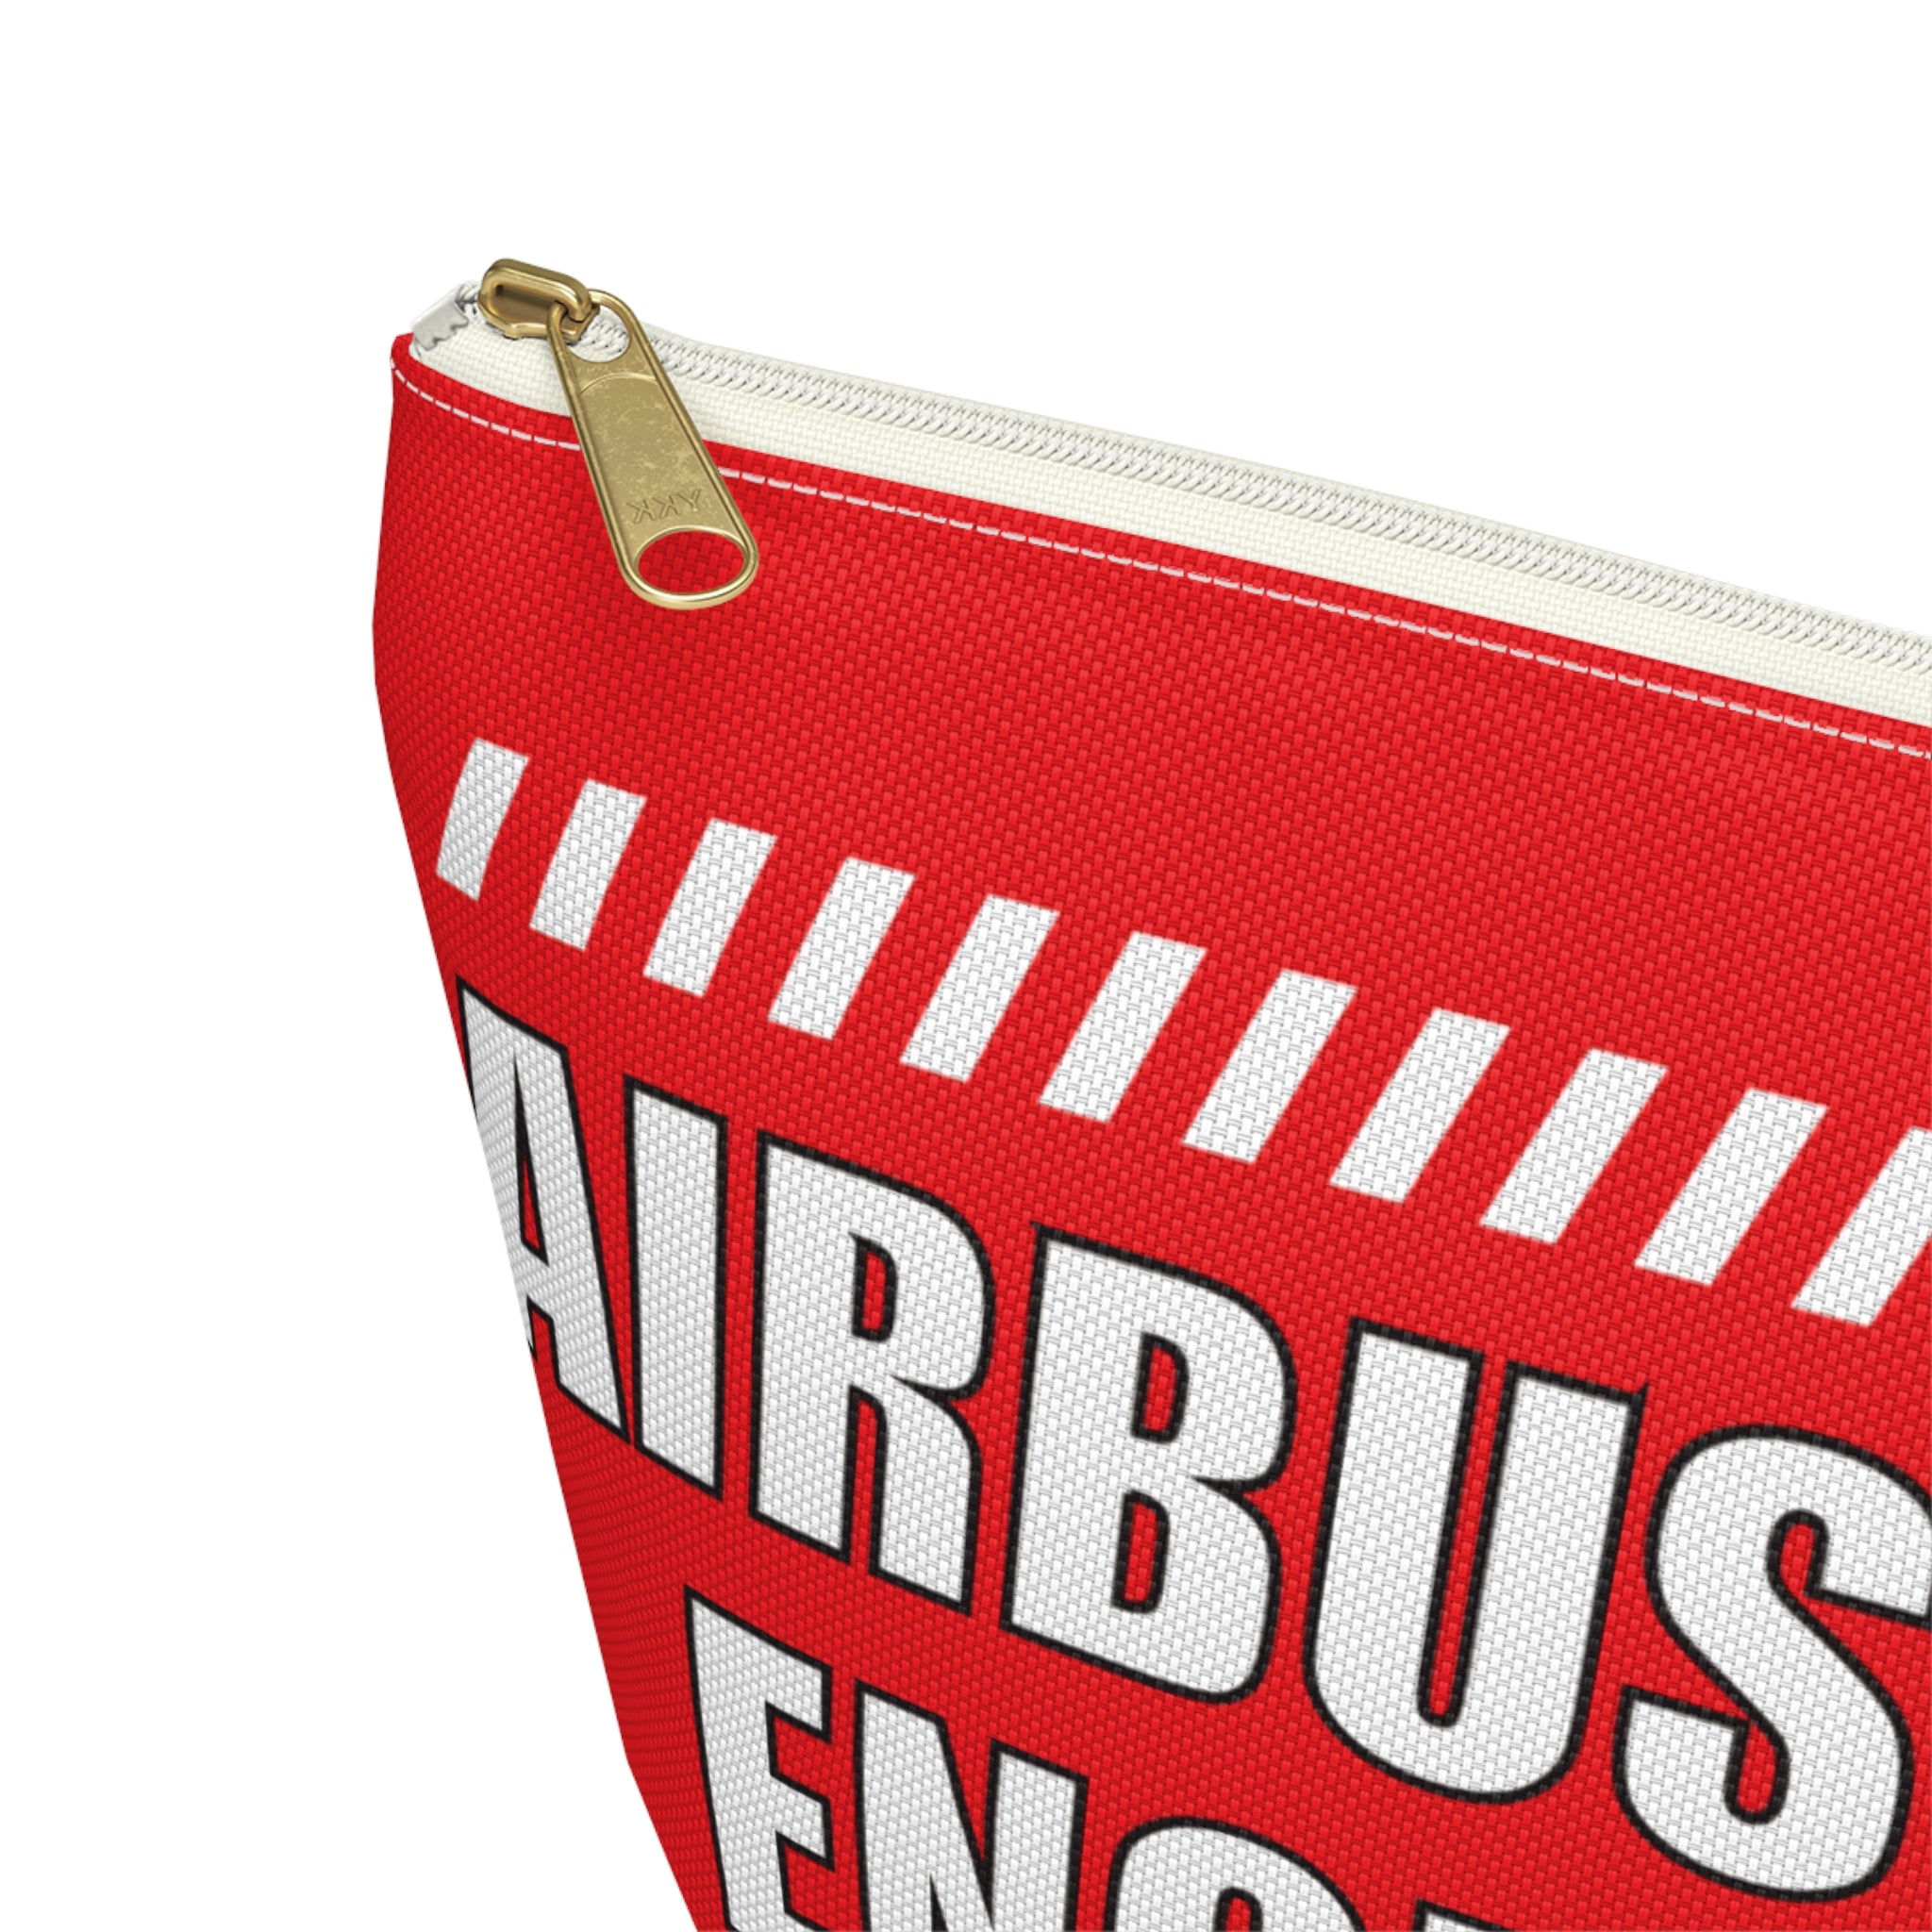 Airbus Engine Parts T-Bottom Accessory Pouch